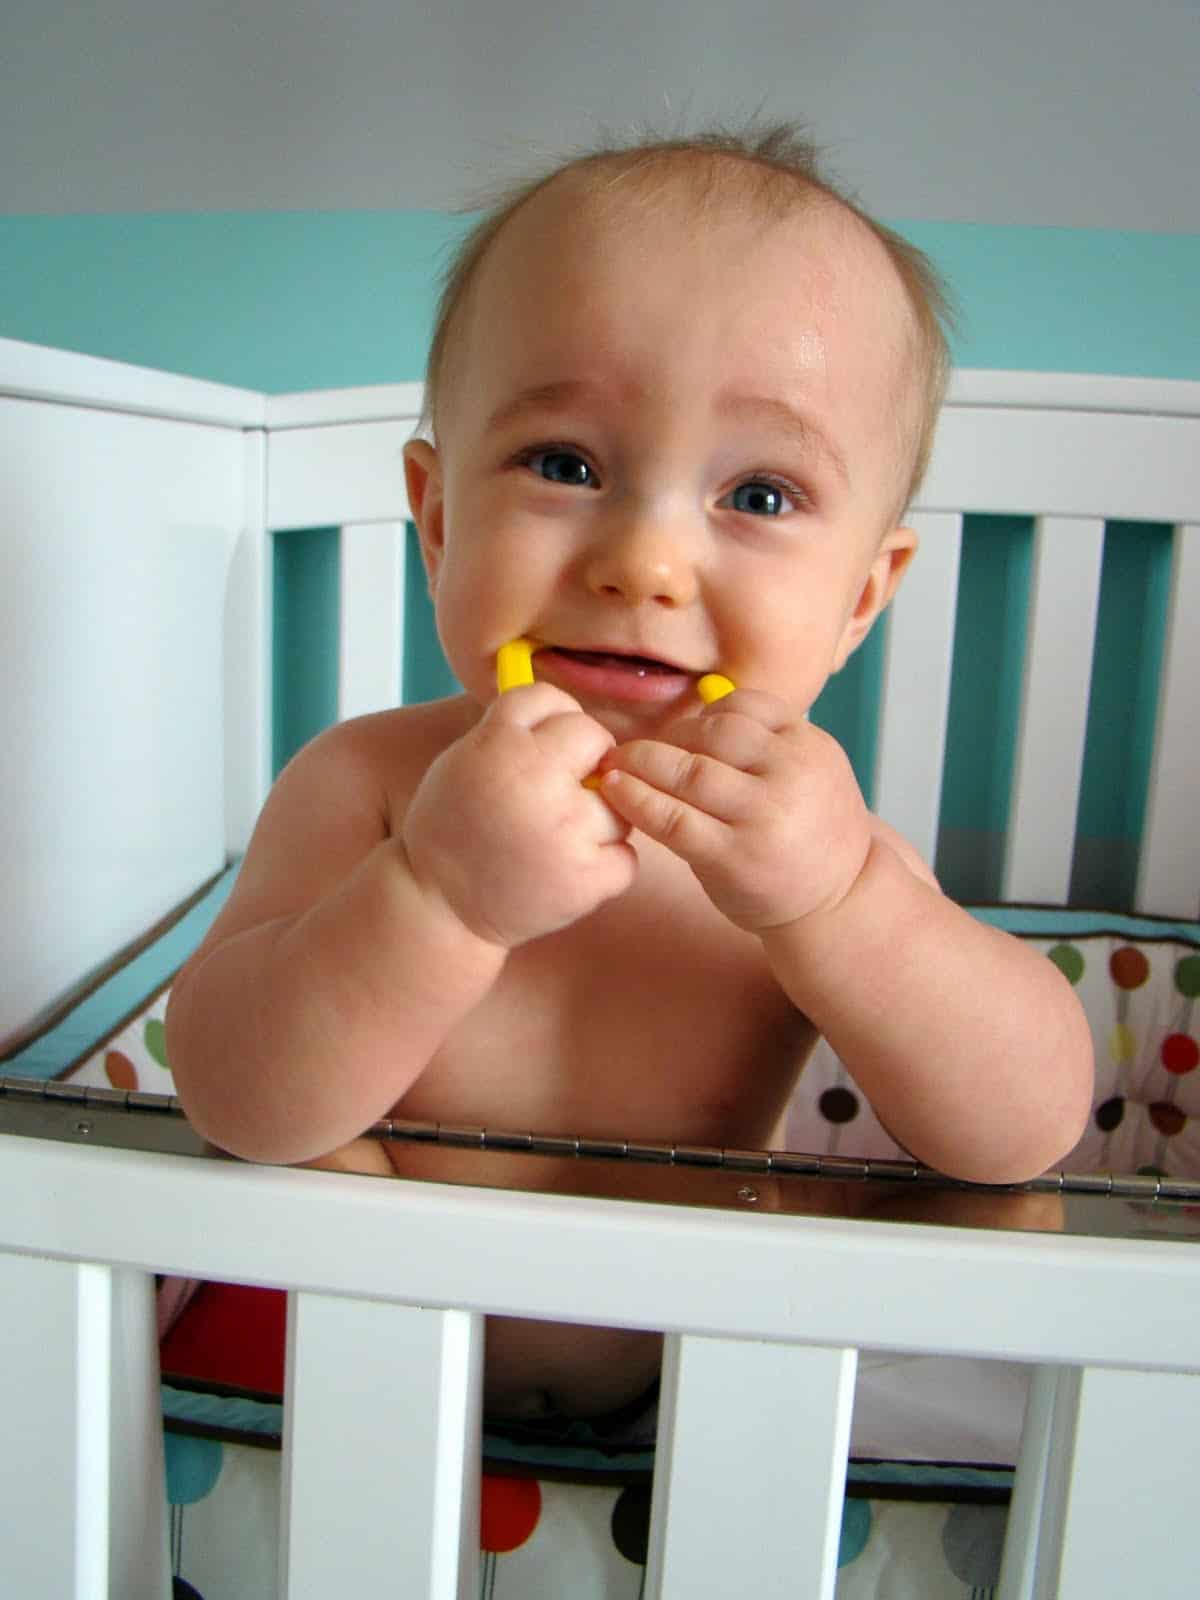 What can you expect during months 9 to 12 of a baby's life? Check out these baby summaries and sleep schedules plus major milestones! Including baby sleep regression 10 months as well as 11 month old tantrums